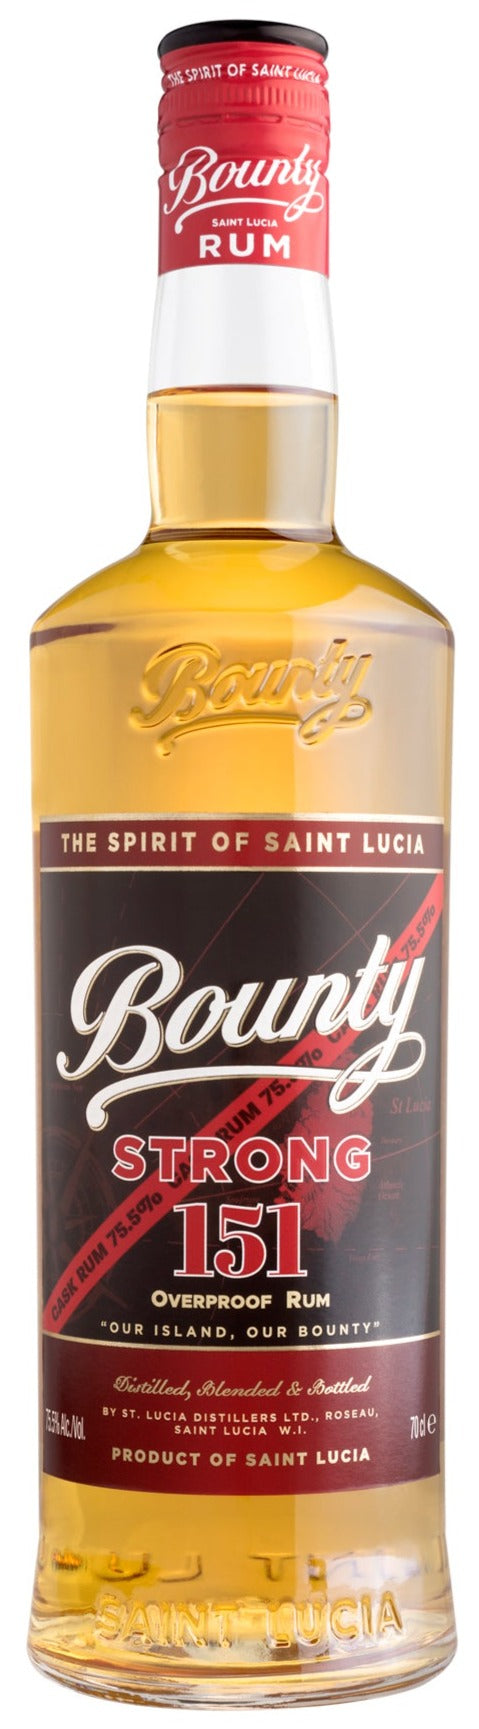 Bounty Strong 151 Rum 70cl